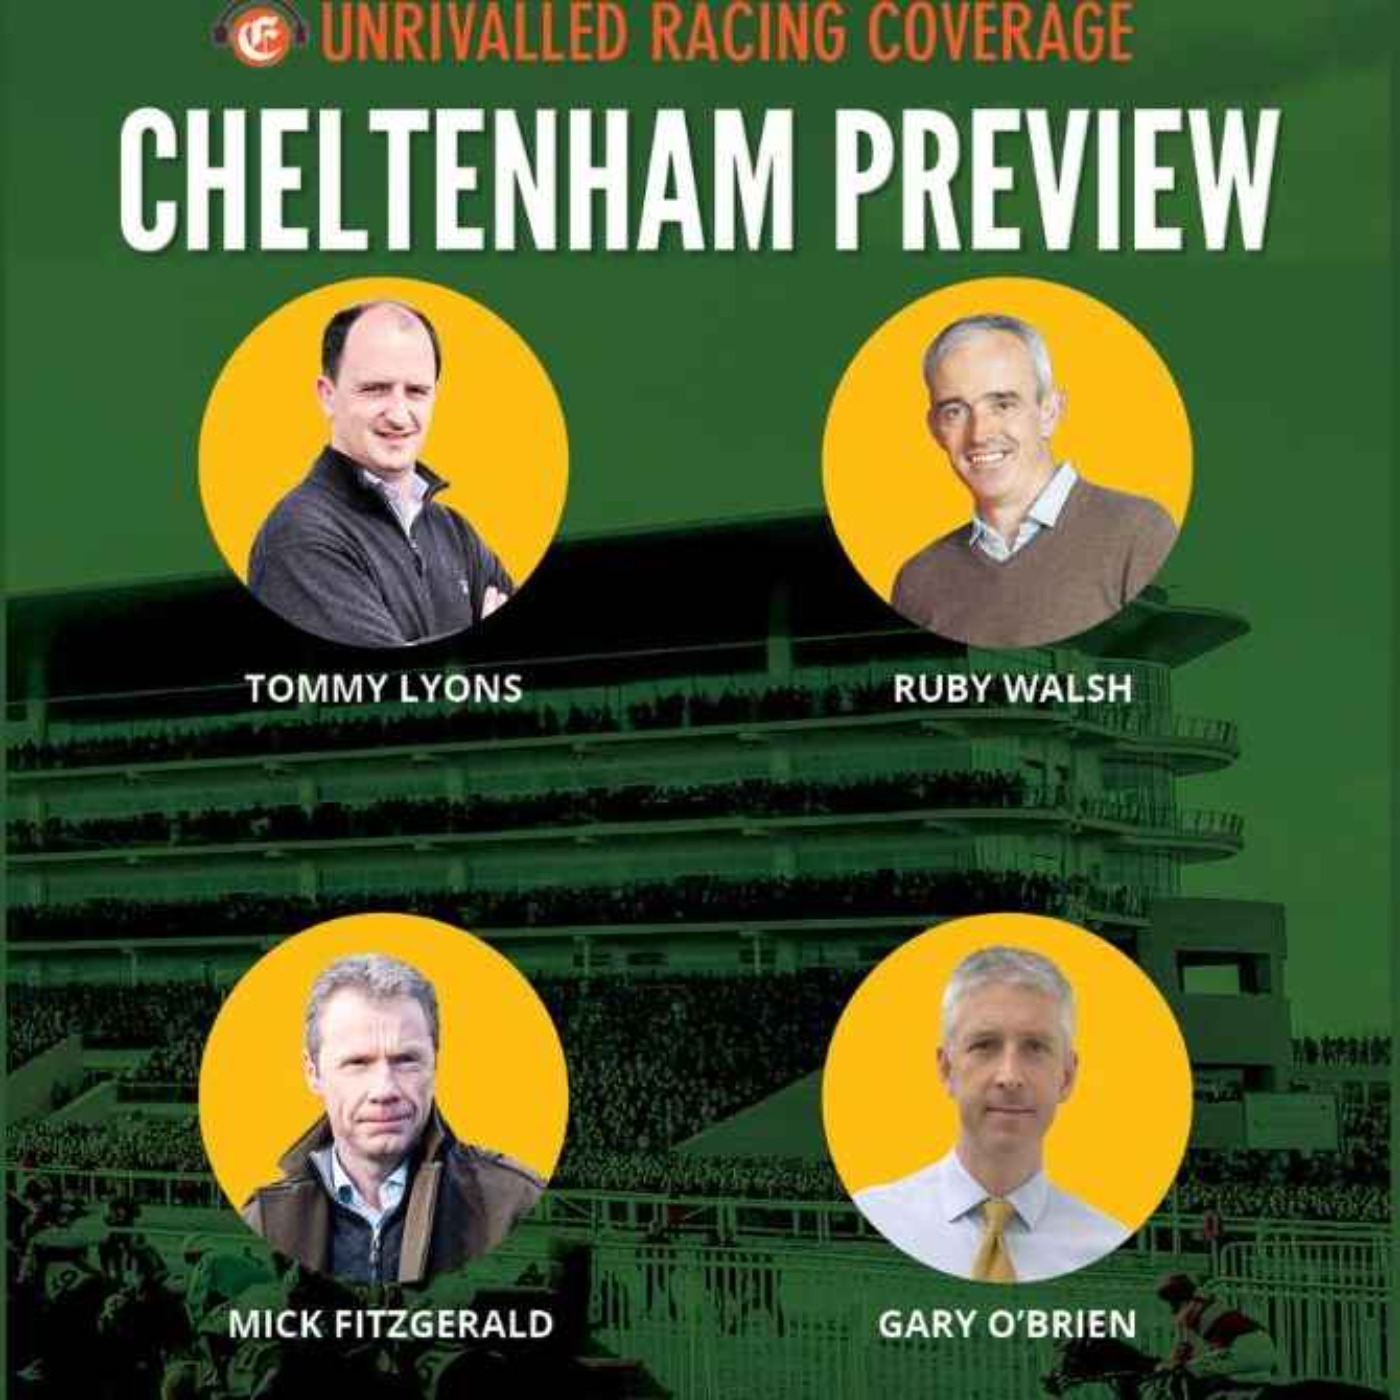 Cheltenham Preview 2023: Tommy Lyons joined by Ruby Walsh, Mick Fitzgerald and Gary O’Brien